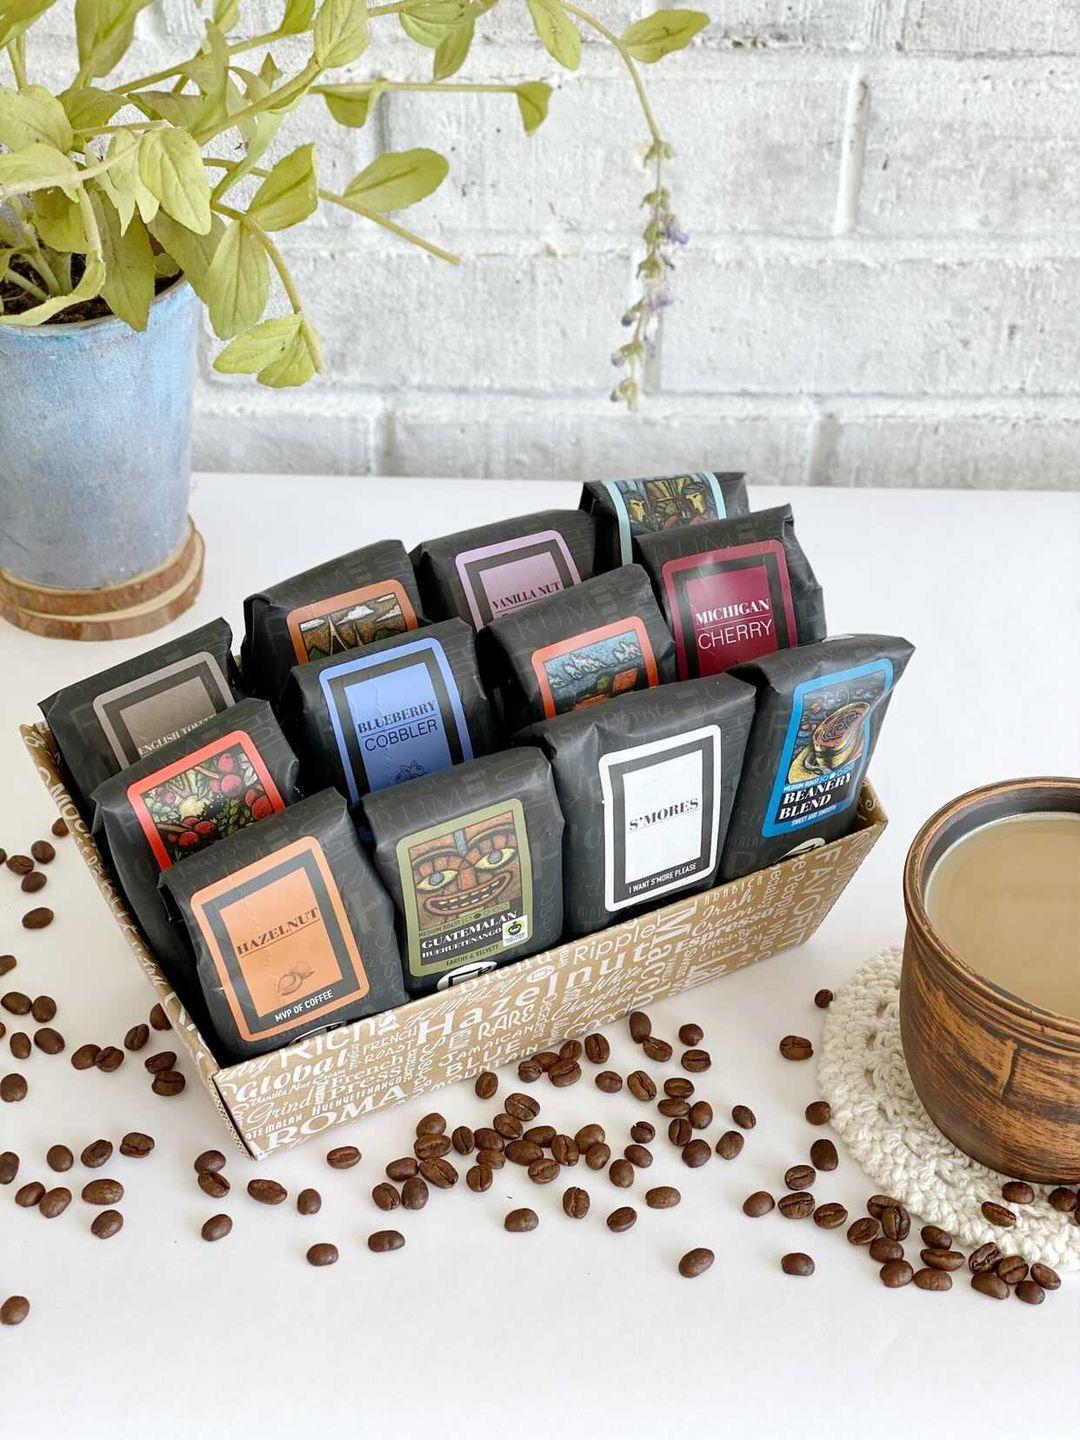 Coffee Gifts to say "I Like You" | Under $50